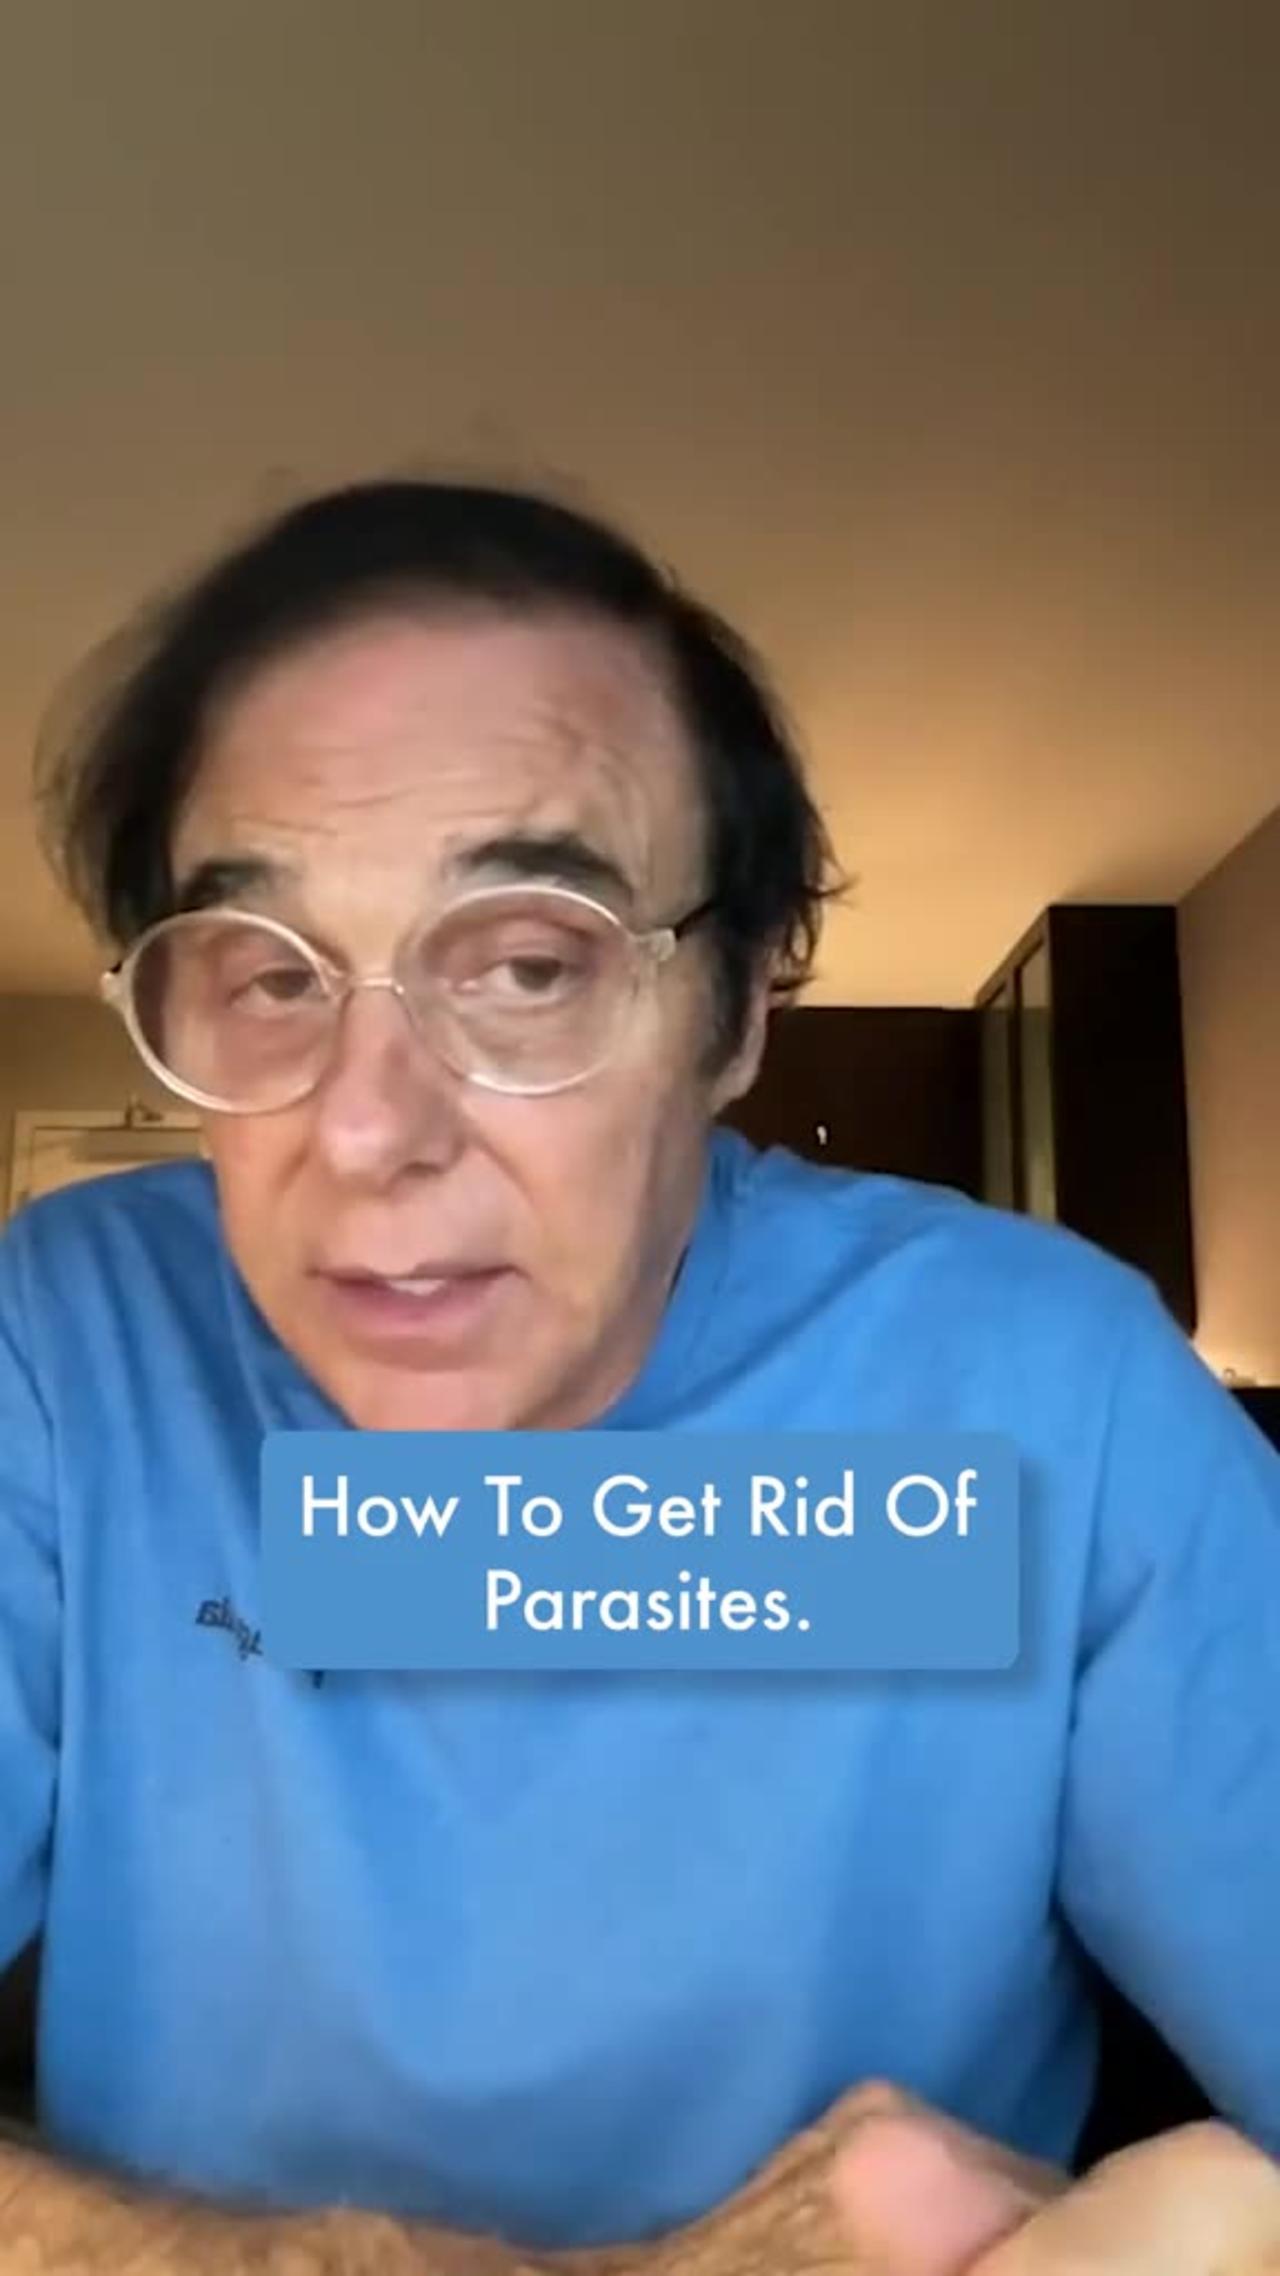 How To Get Rid Of Parasites - Dr. Thomas Lodi